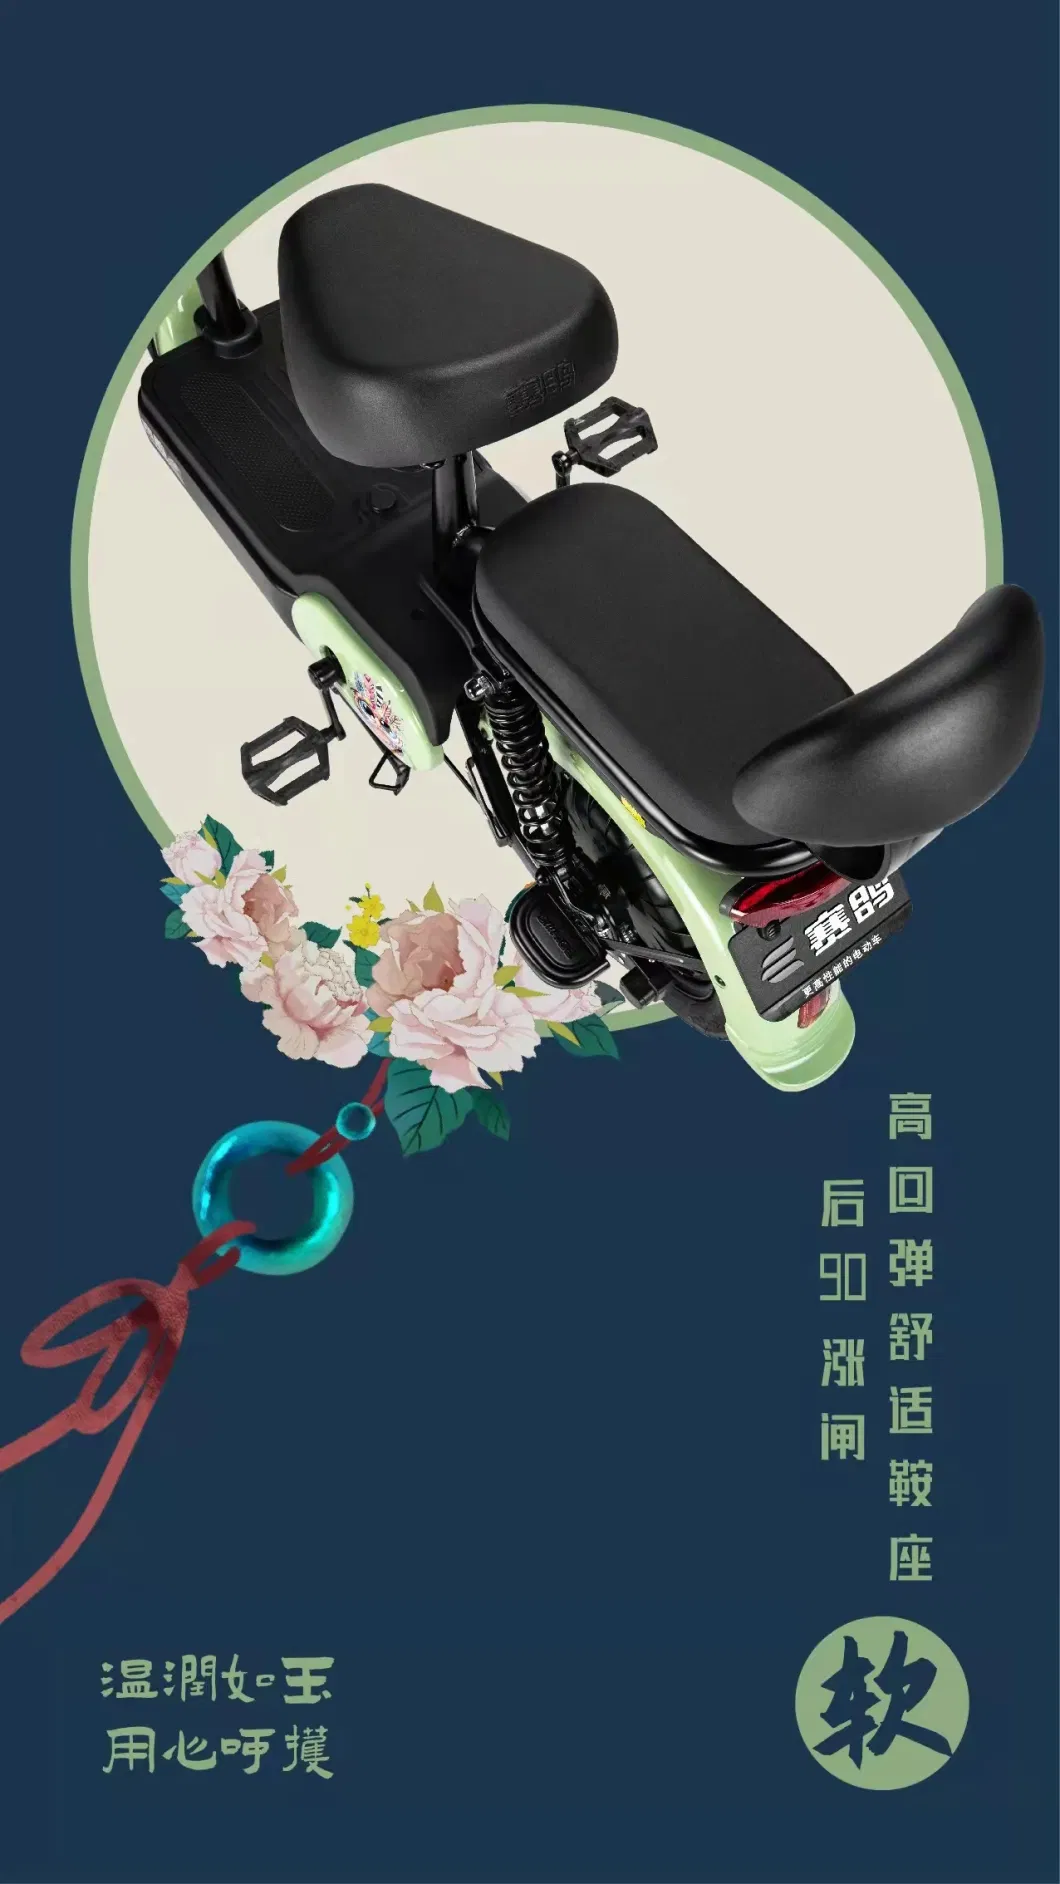 Chinese Famous Factory Supply EEC Model Yg Electric Bicycle